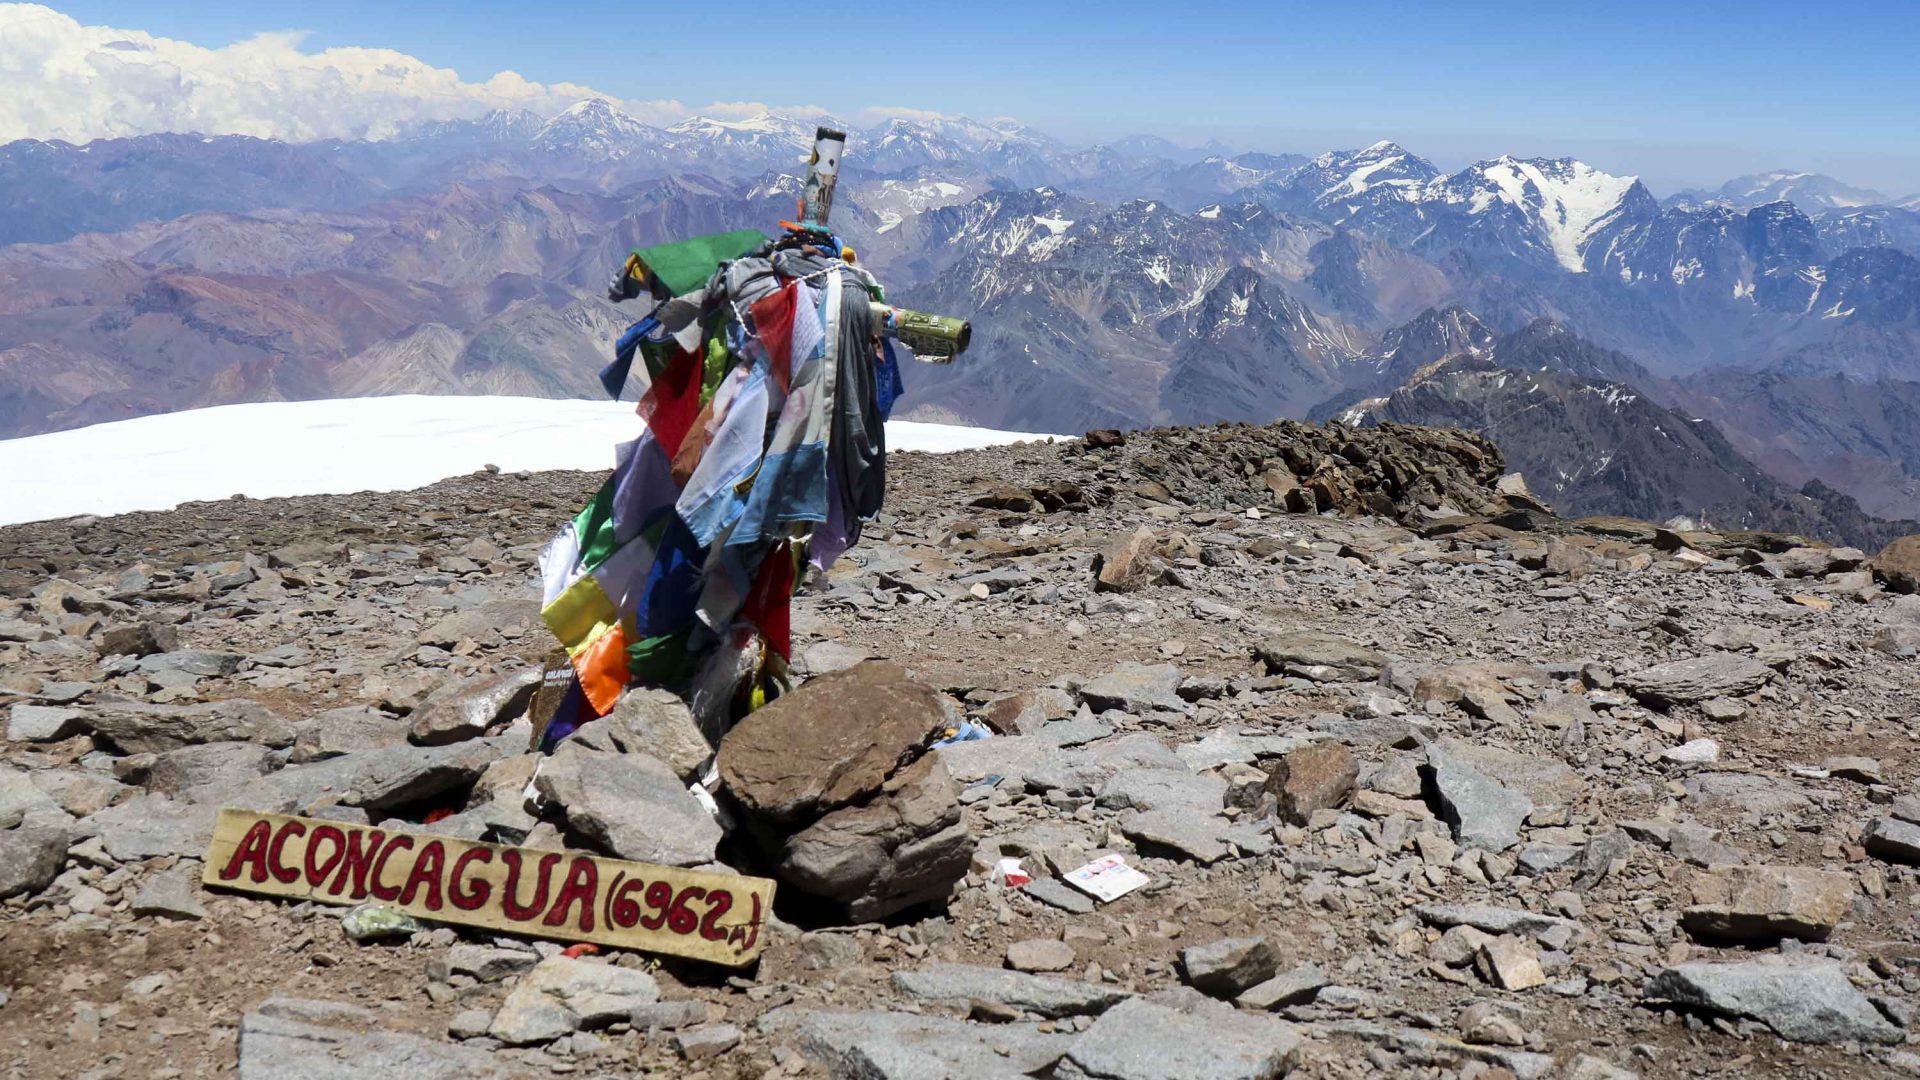 Prayer flags and a sign that reads 'Aconcagua' mark the summit of this mountain.